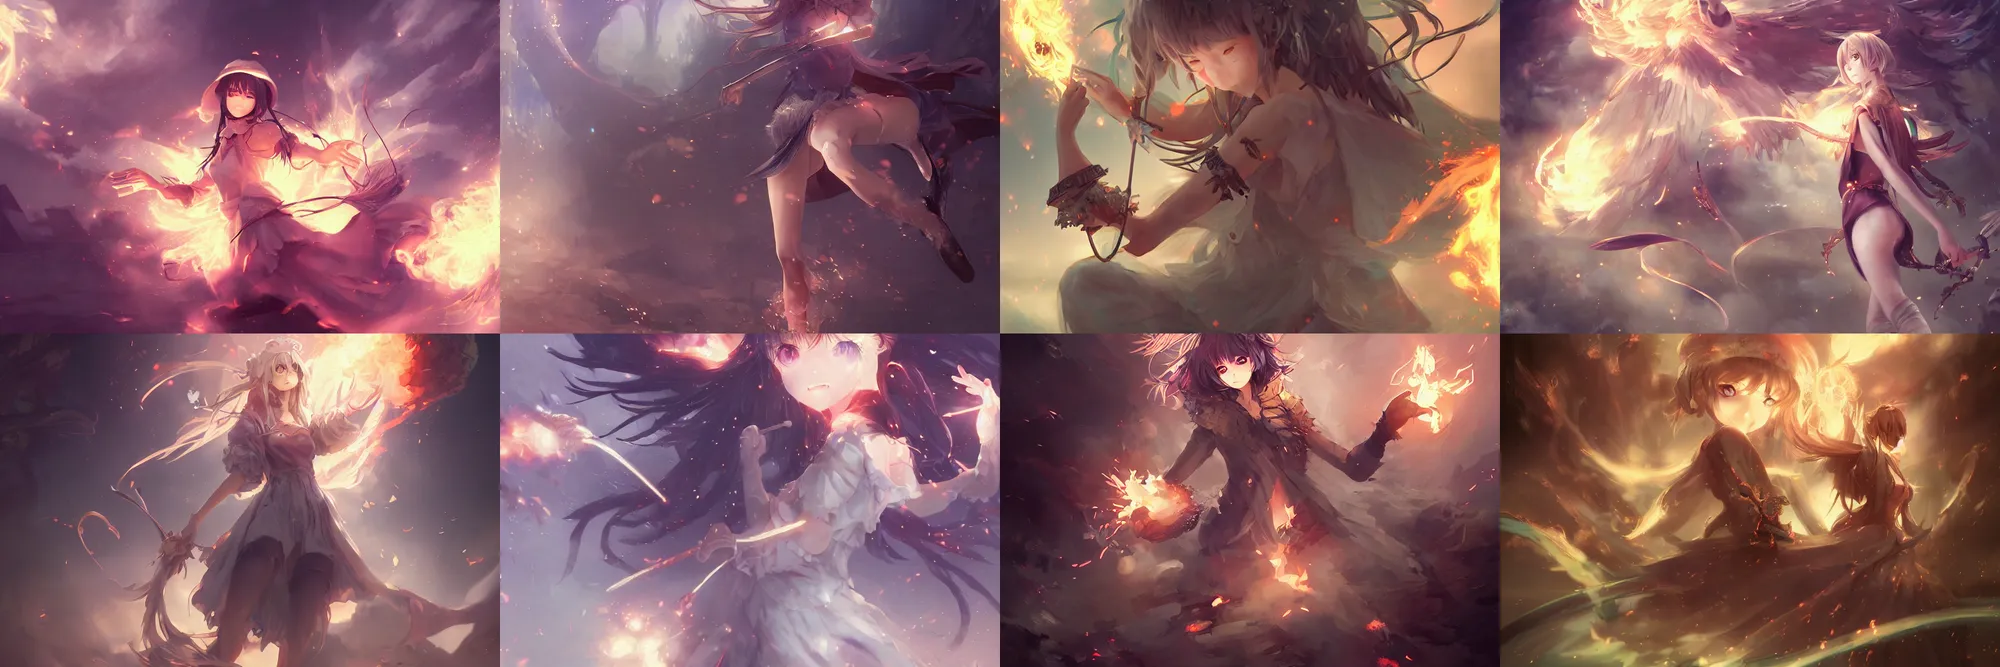 Prompt: Digital anime art by WLOP and Mobius, Village at noon, A cute sorceress fights with magic, wide legged stance, determined expression, burning corpses of demons, highly detailed, intriguing lighting